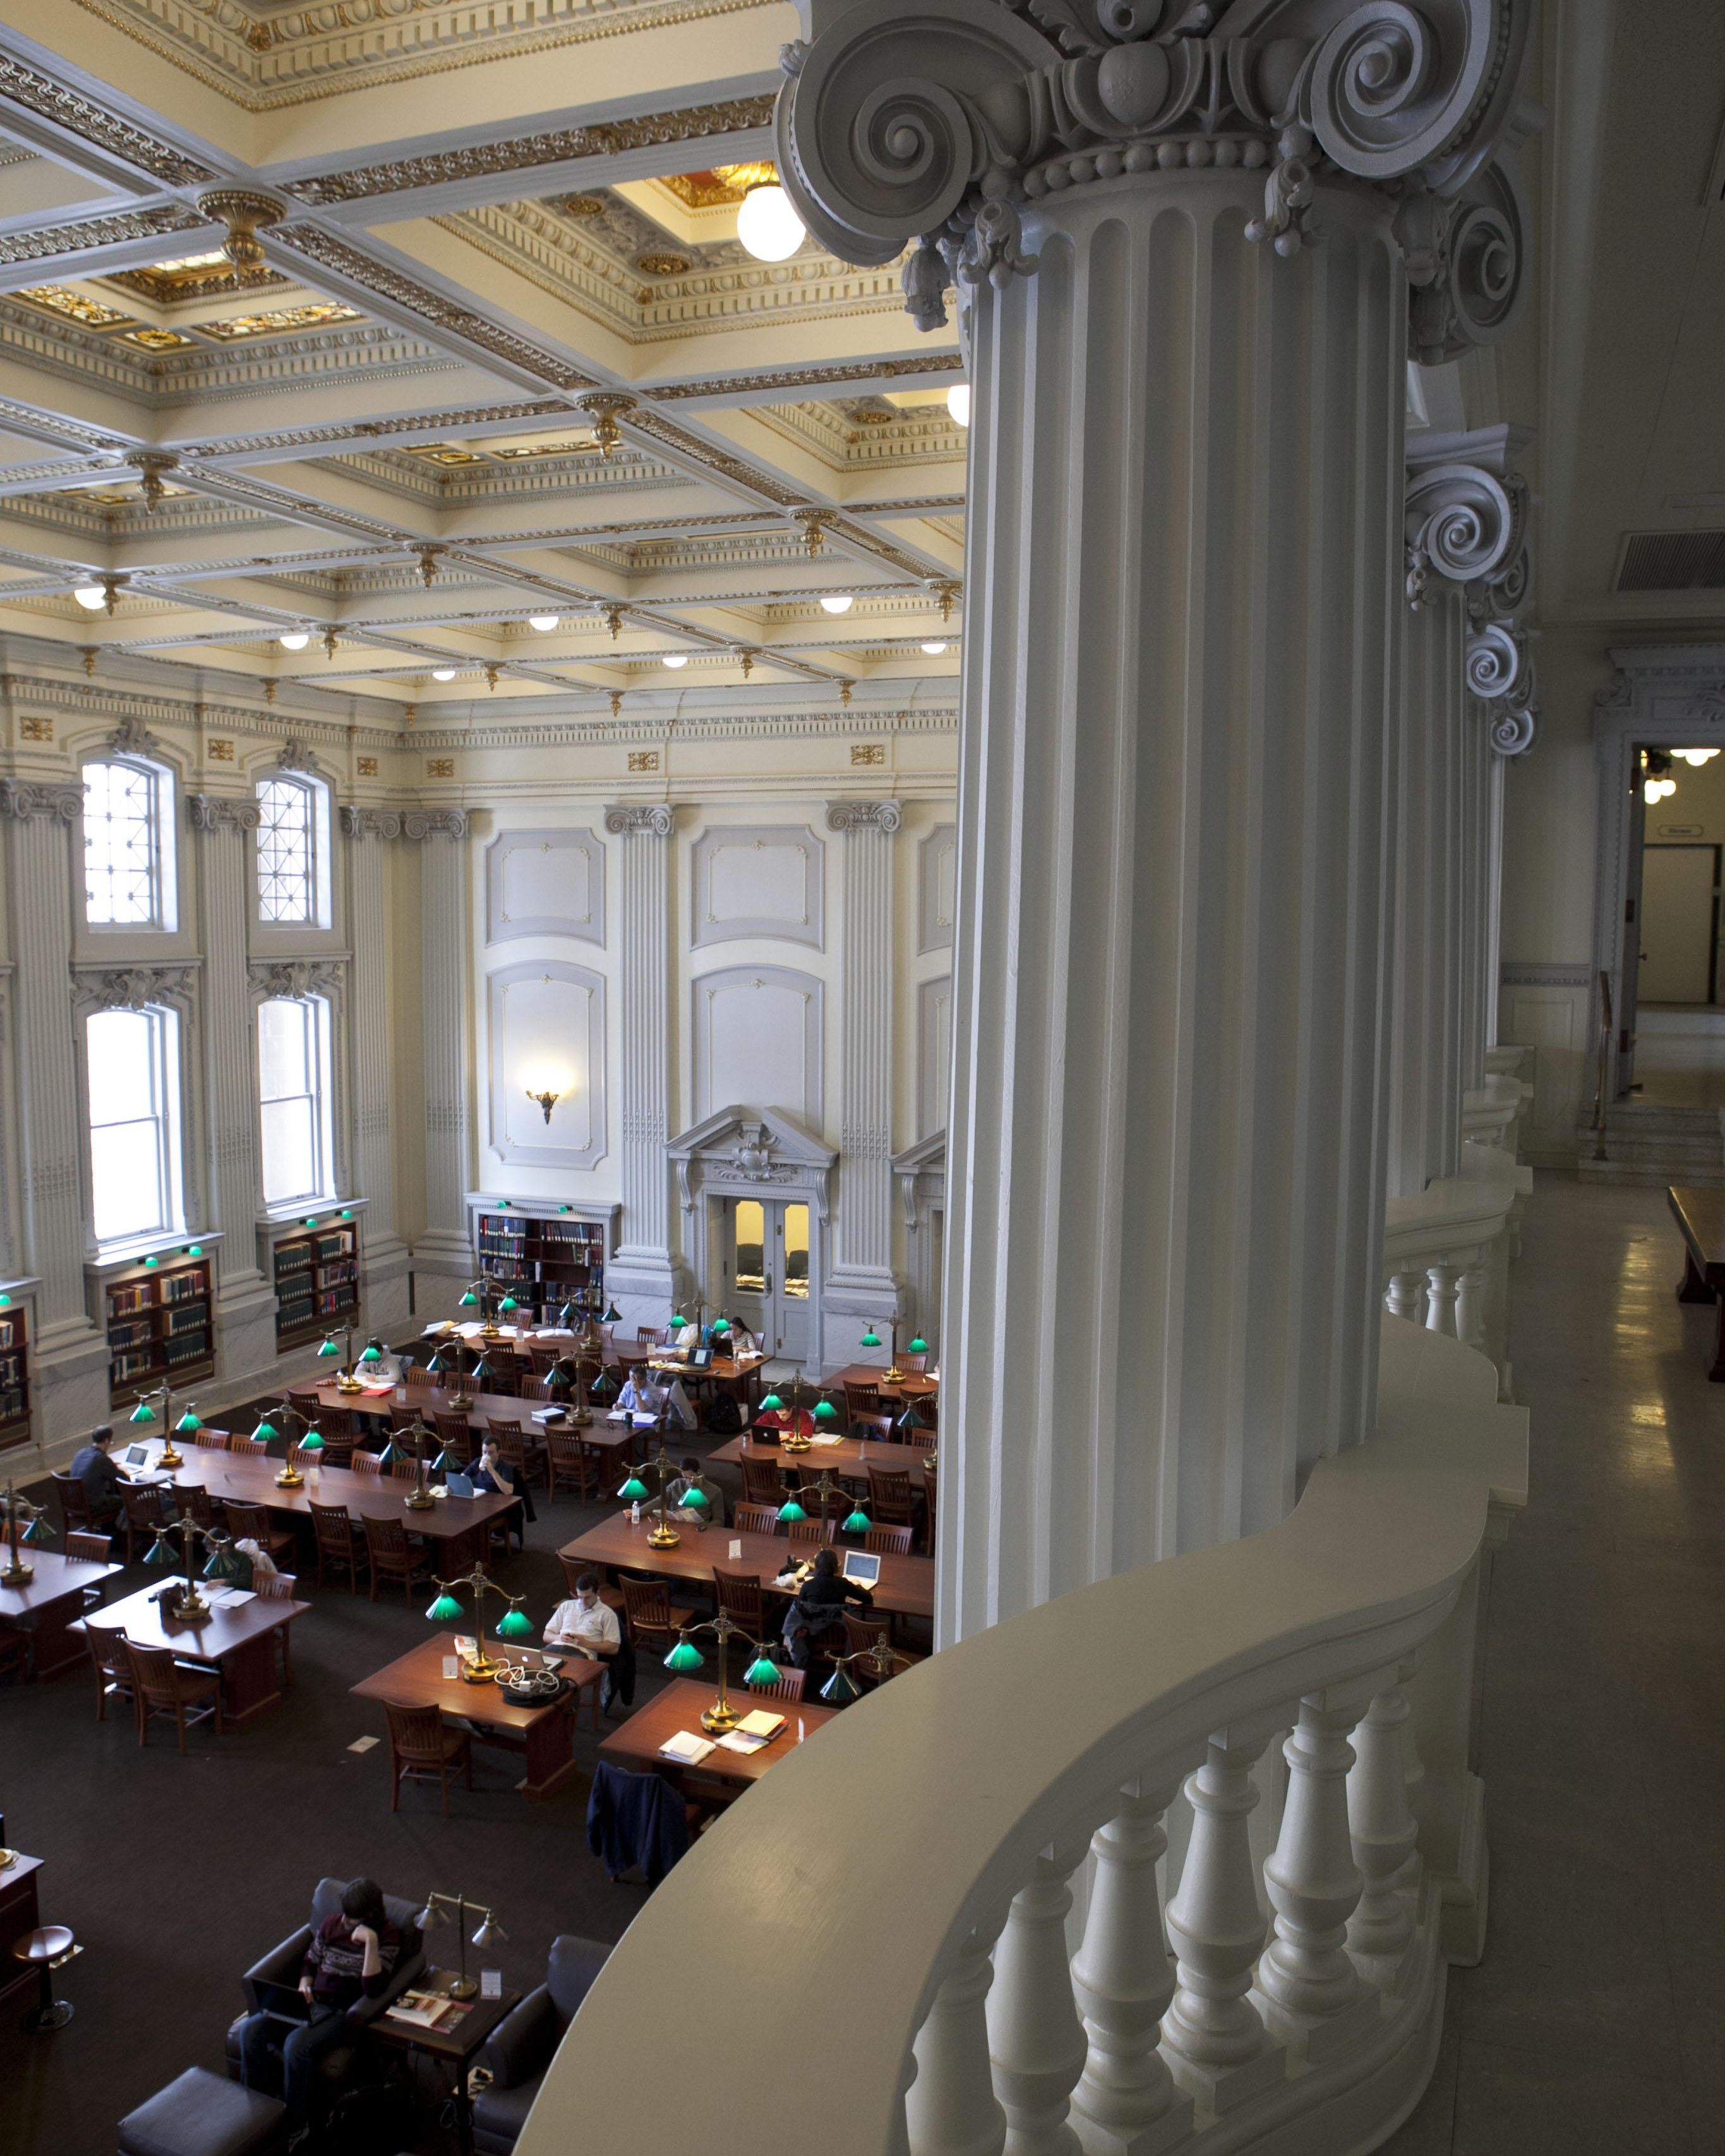 A balcony view of the Wisconsin Historical Society Reading room showing long wooden tables, chairs, and reading lamps beneath an ornate ceiling.